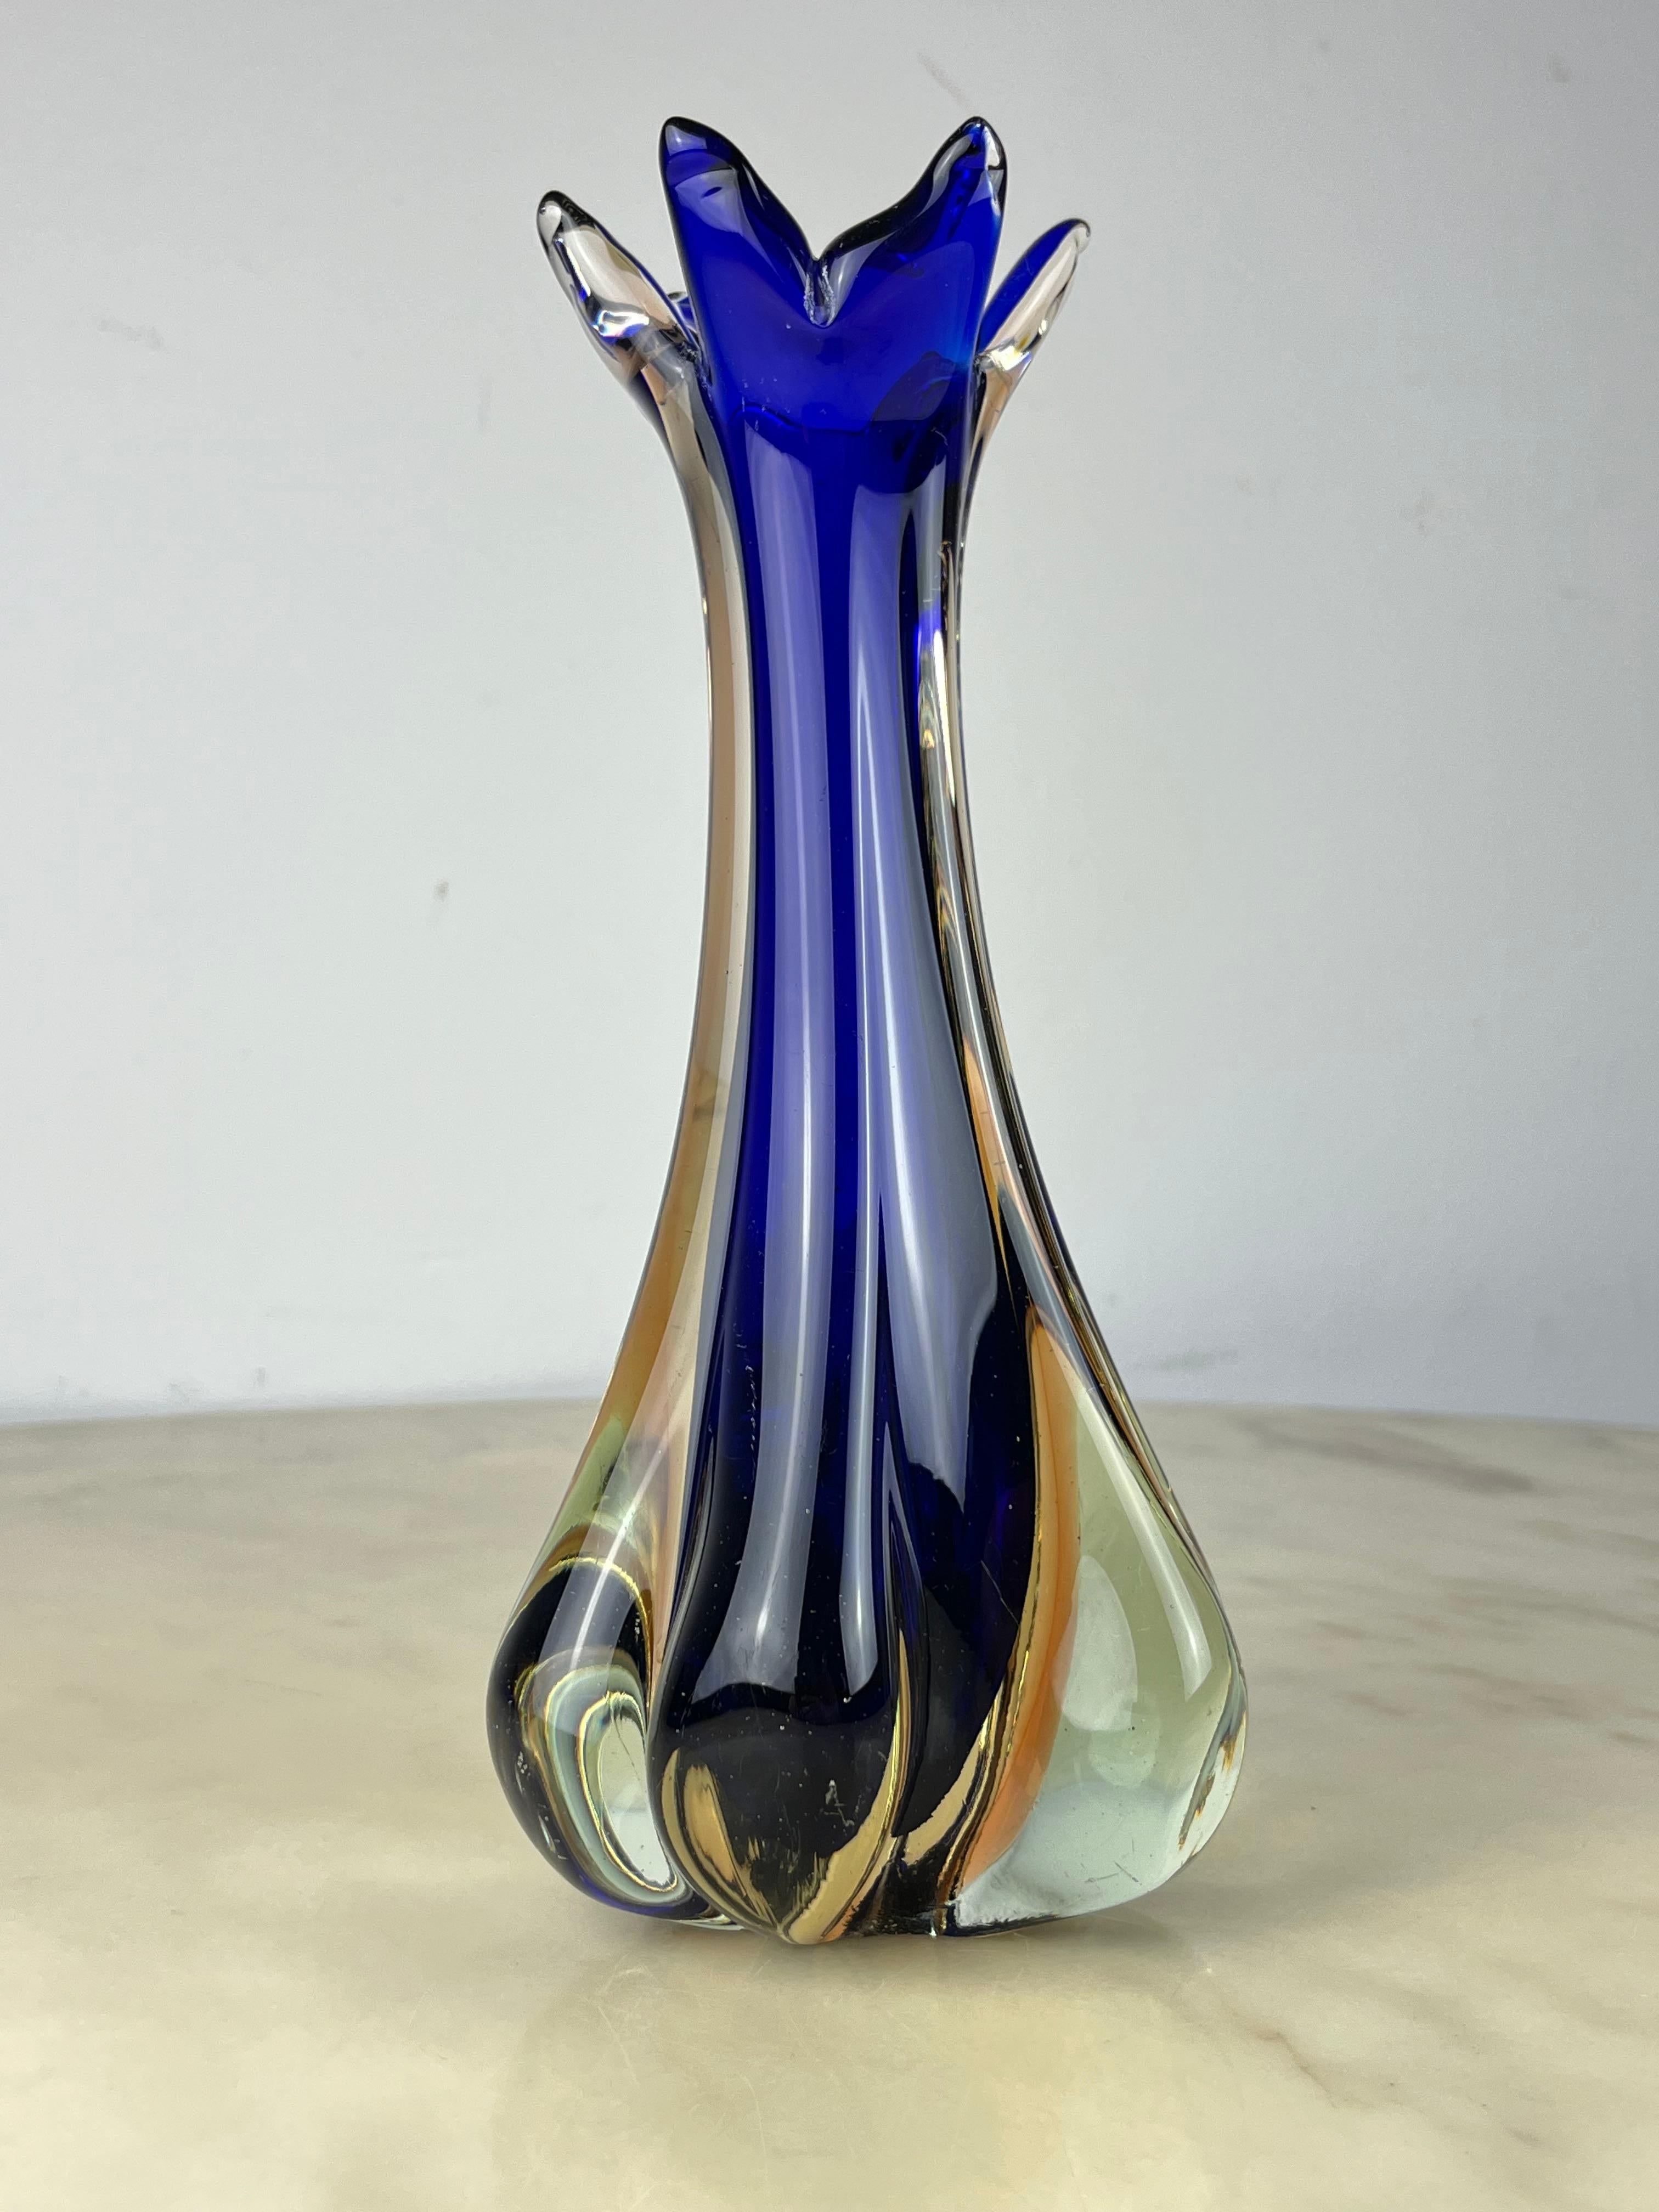 Murano submerged glass vase, Italy, 1970s
Intact and in good condition. Imperceptible signs of aging.
Observe the air bubbles inside the glass, evidence of the craftsmanship.